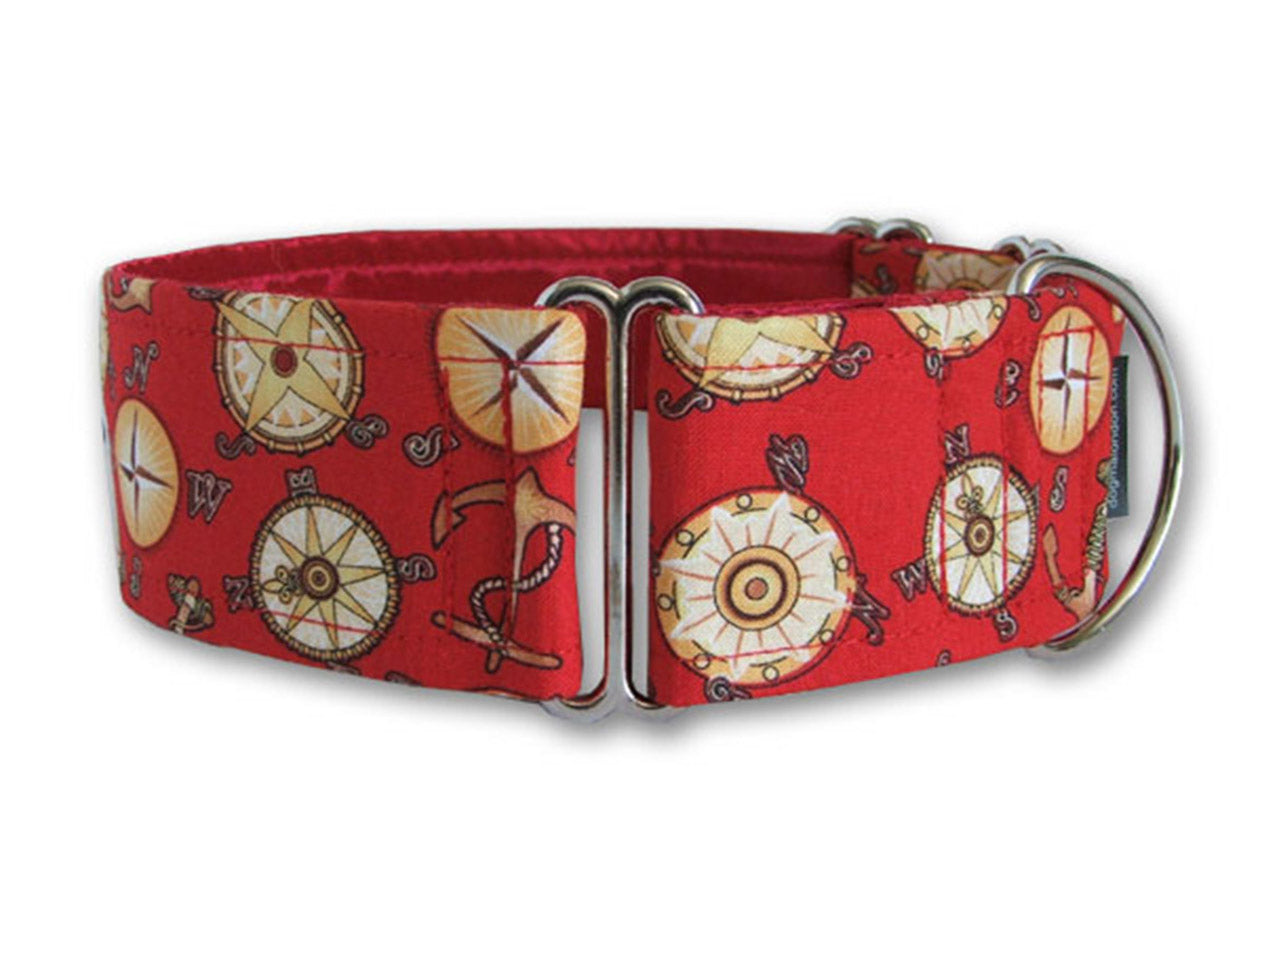 Rover will chart a course to his next adventure (or nap) in this stylish red nautical-themed collar!